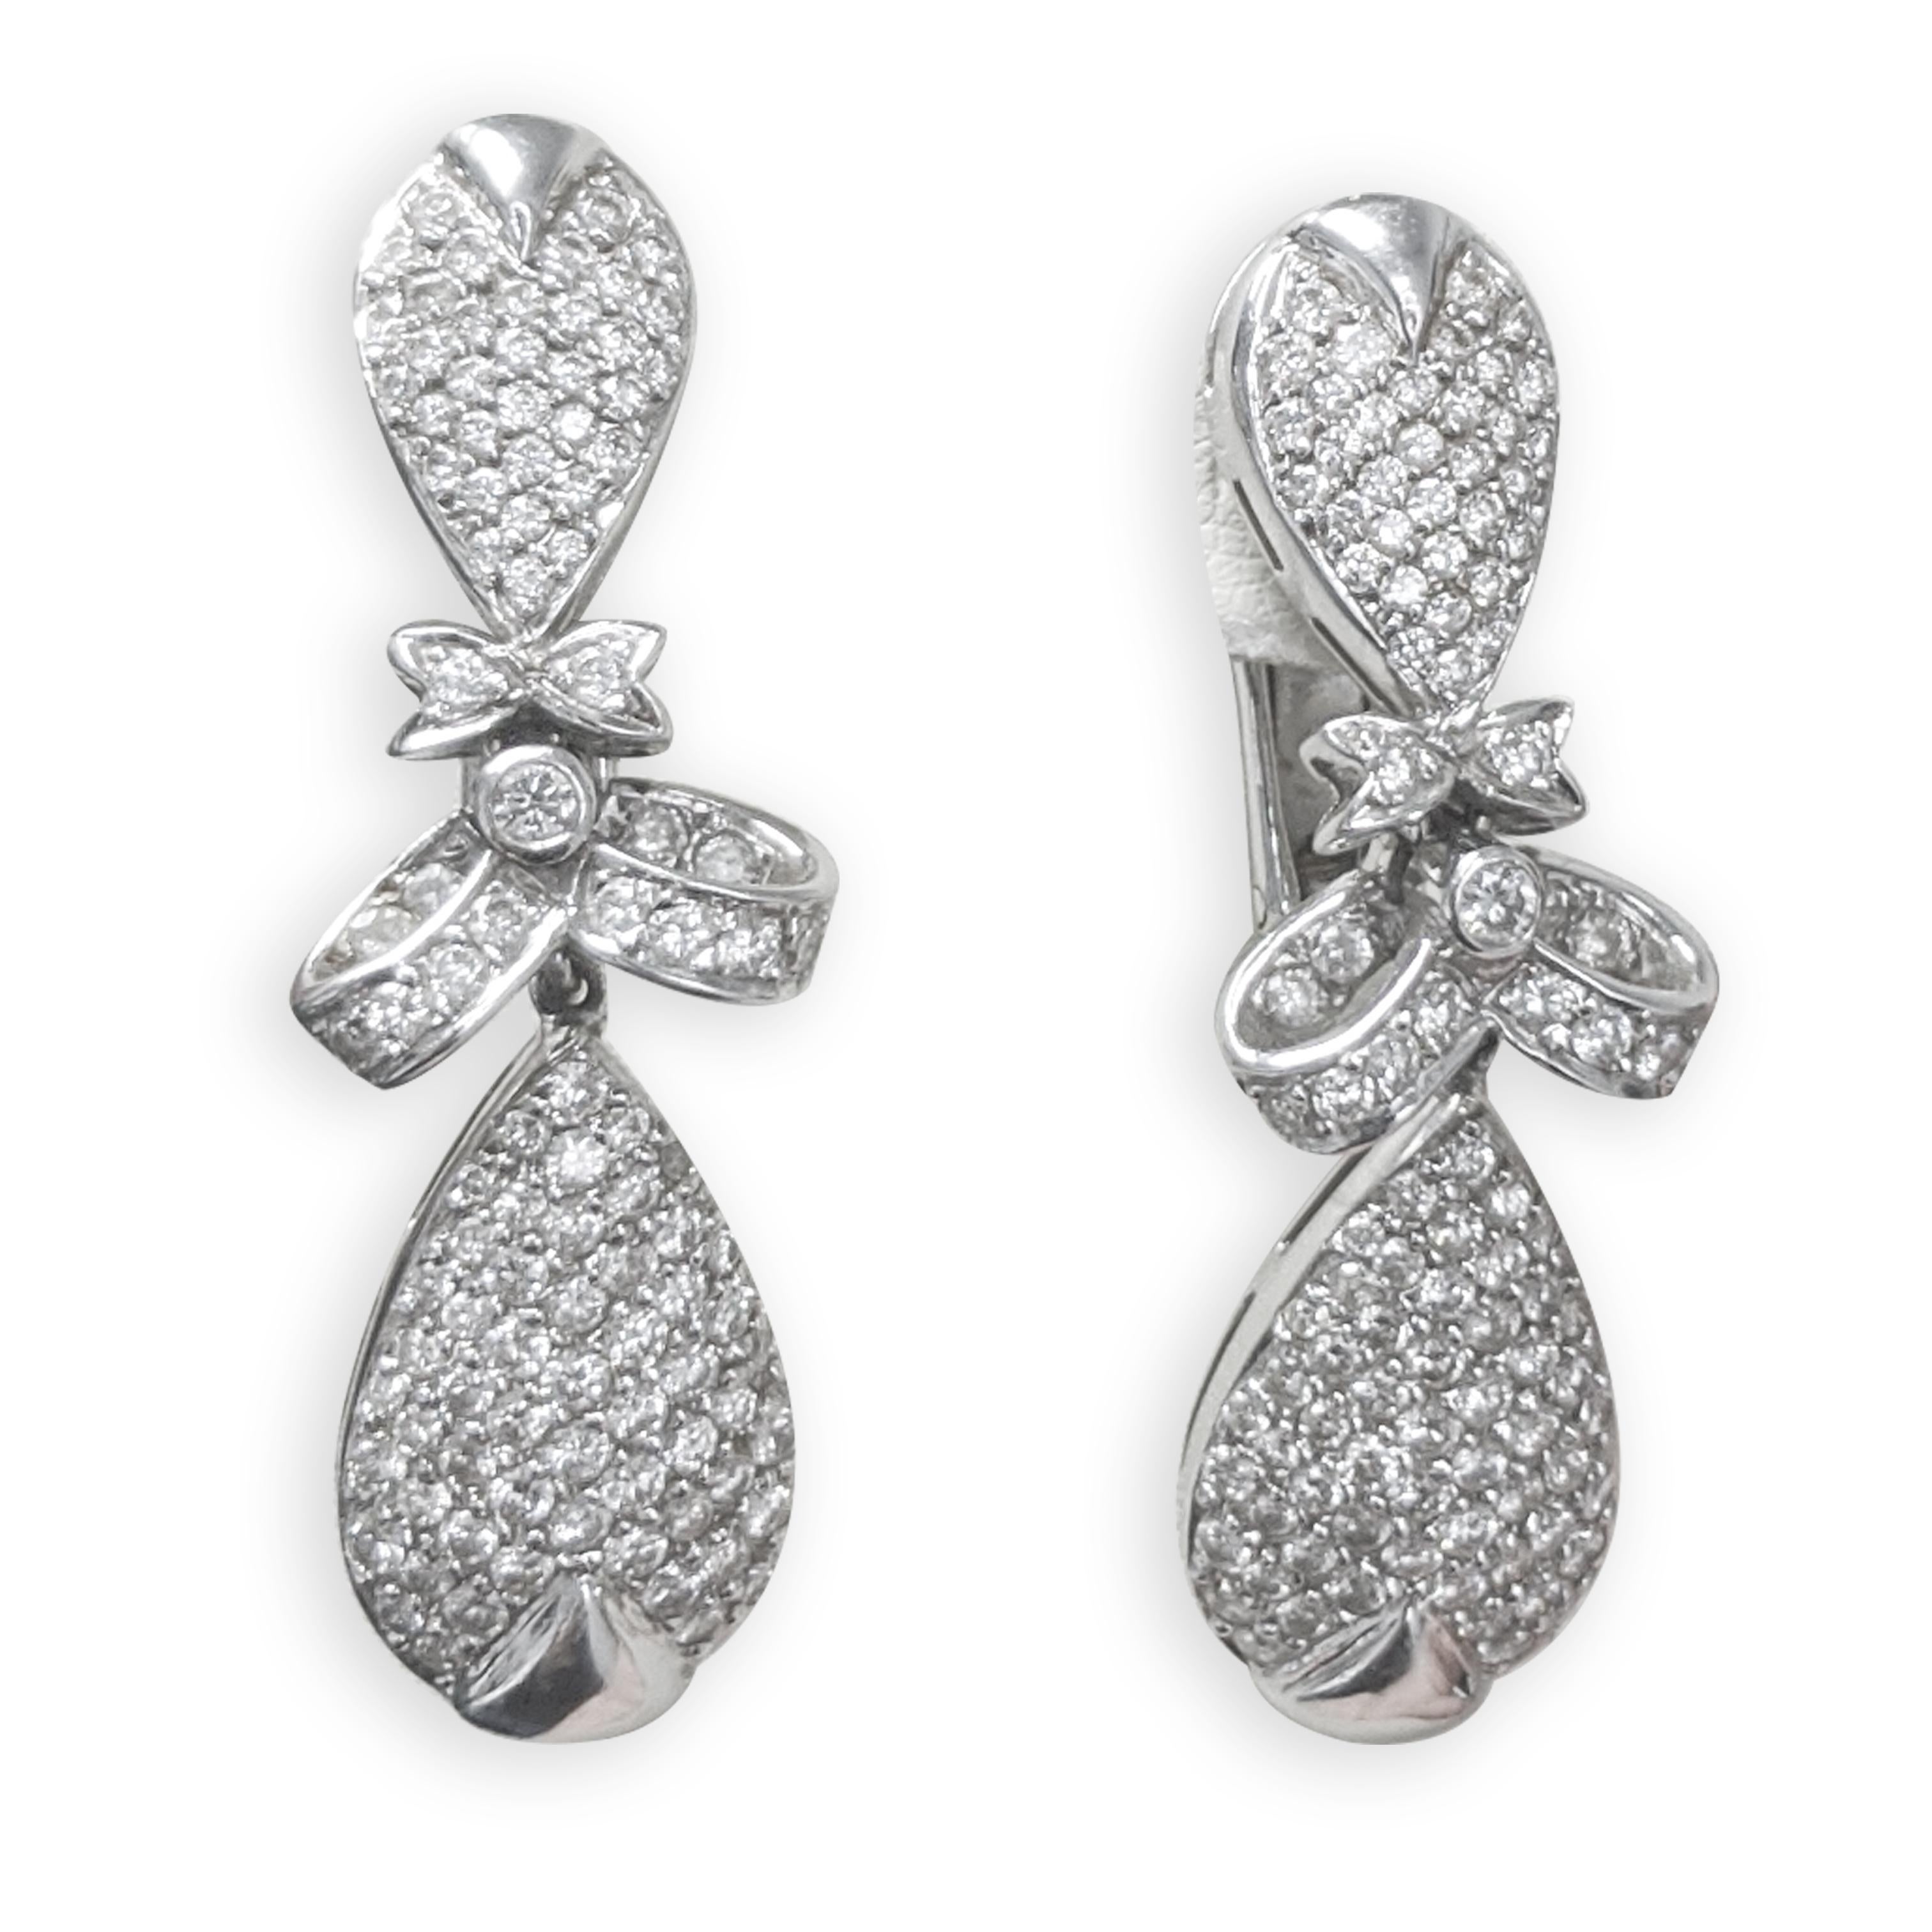 5 1/2 CRT White Diamond Earrings  (18K White Gold) Hand Made (Pairs well with the necklace and bracelet).